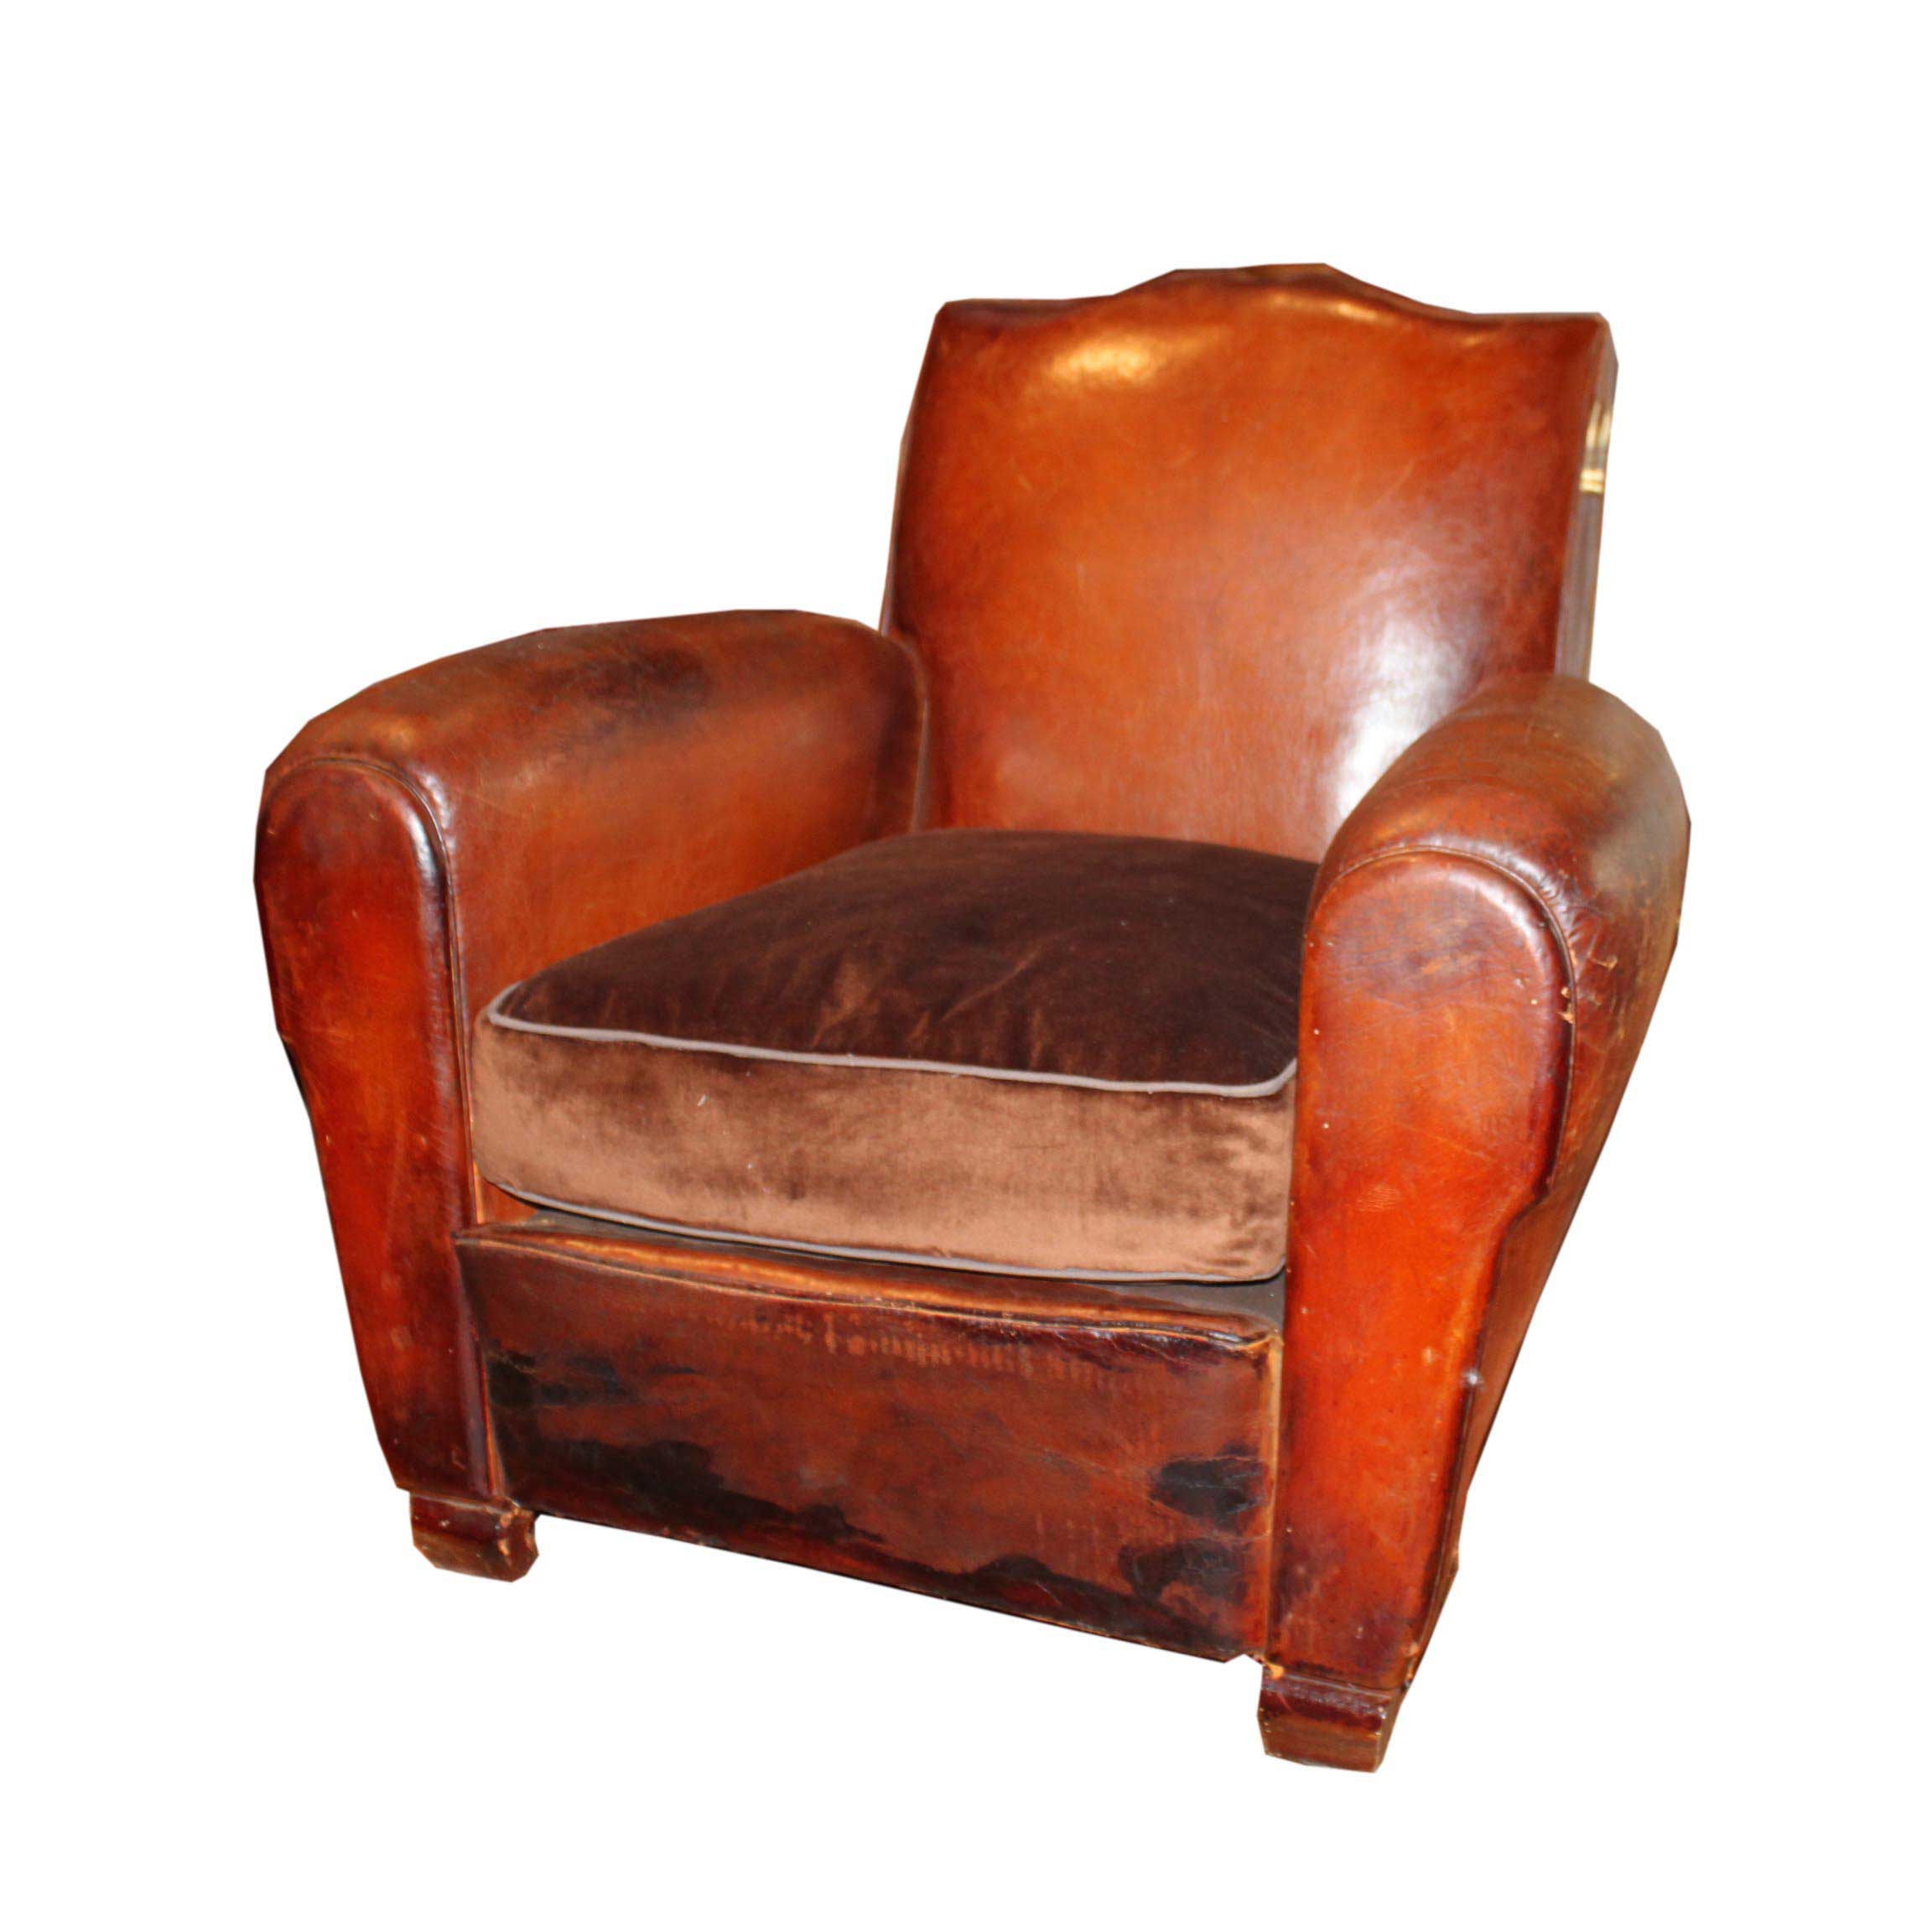 Vintage French Leather Club Chair, French Leather Club Chair